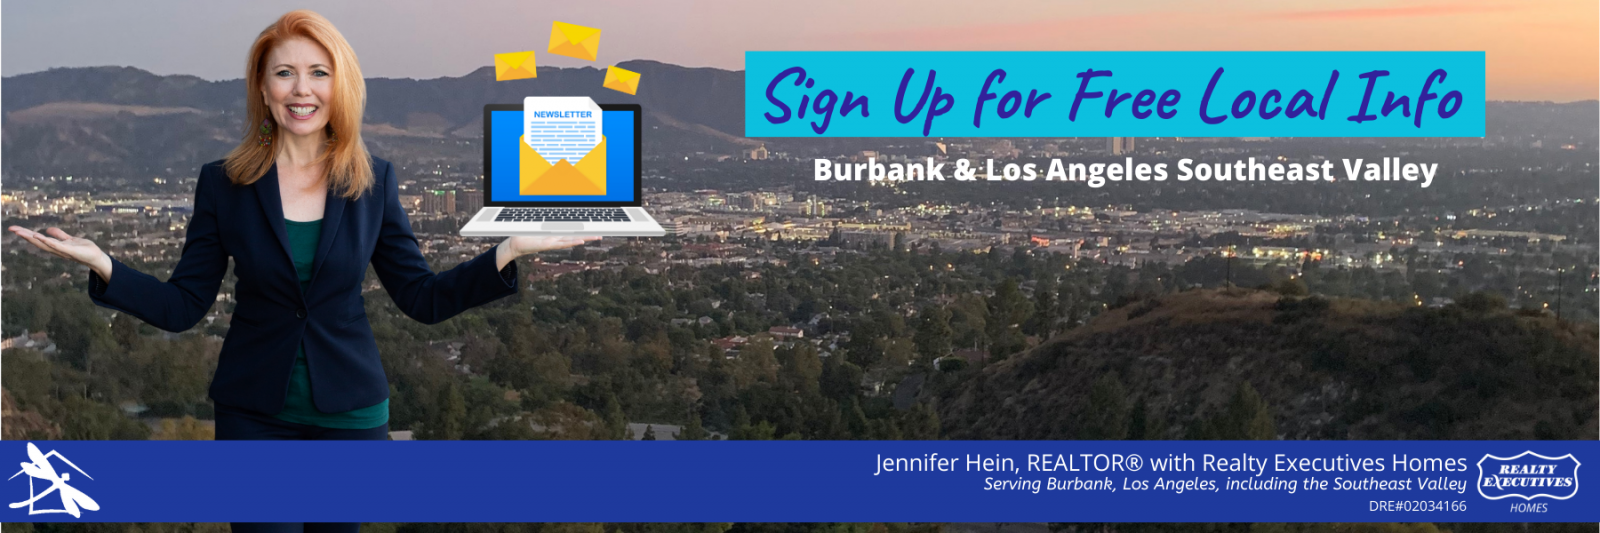 Sign up for the free weekly newsletter for Burbank and Los Angeles Southeast Valley area